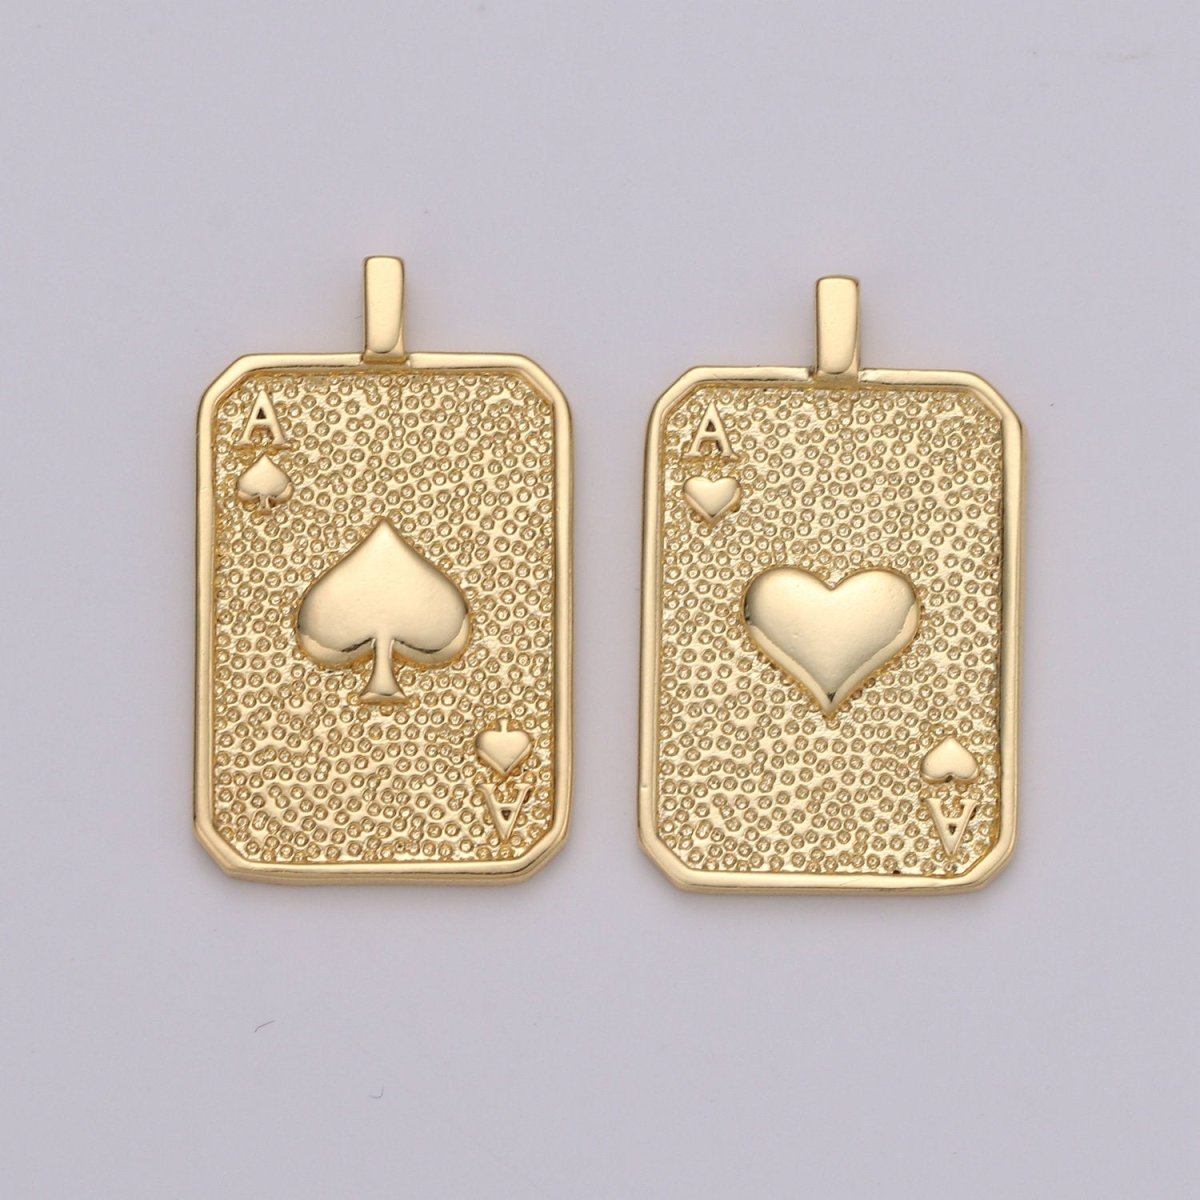 Gold Tag Ace of Spade Charm Gold Filled Medallion, Ace of Heart Pendant Necklace Charm for Vegas Inspired Necklace Supply J-029 J-030 - DLUXCA